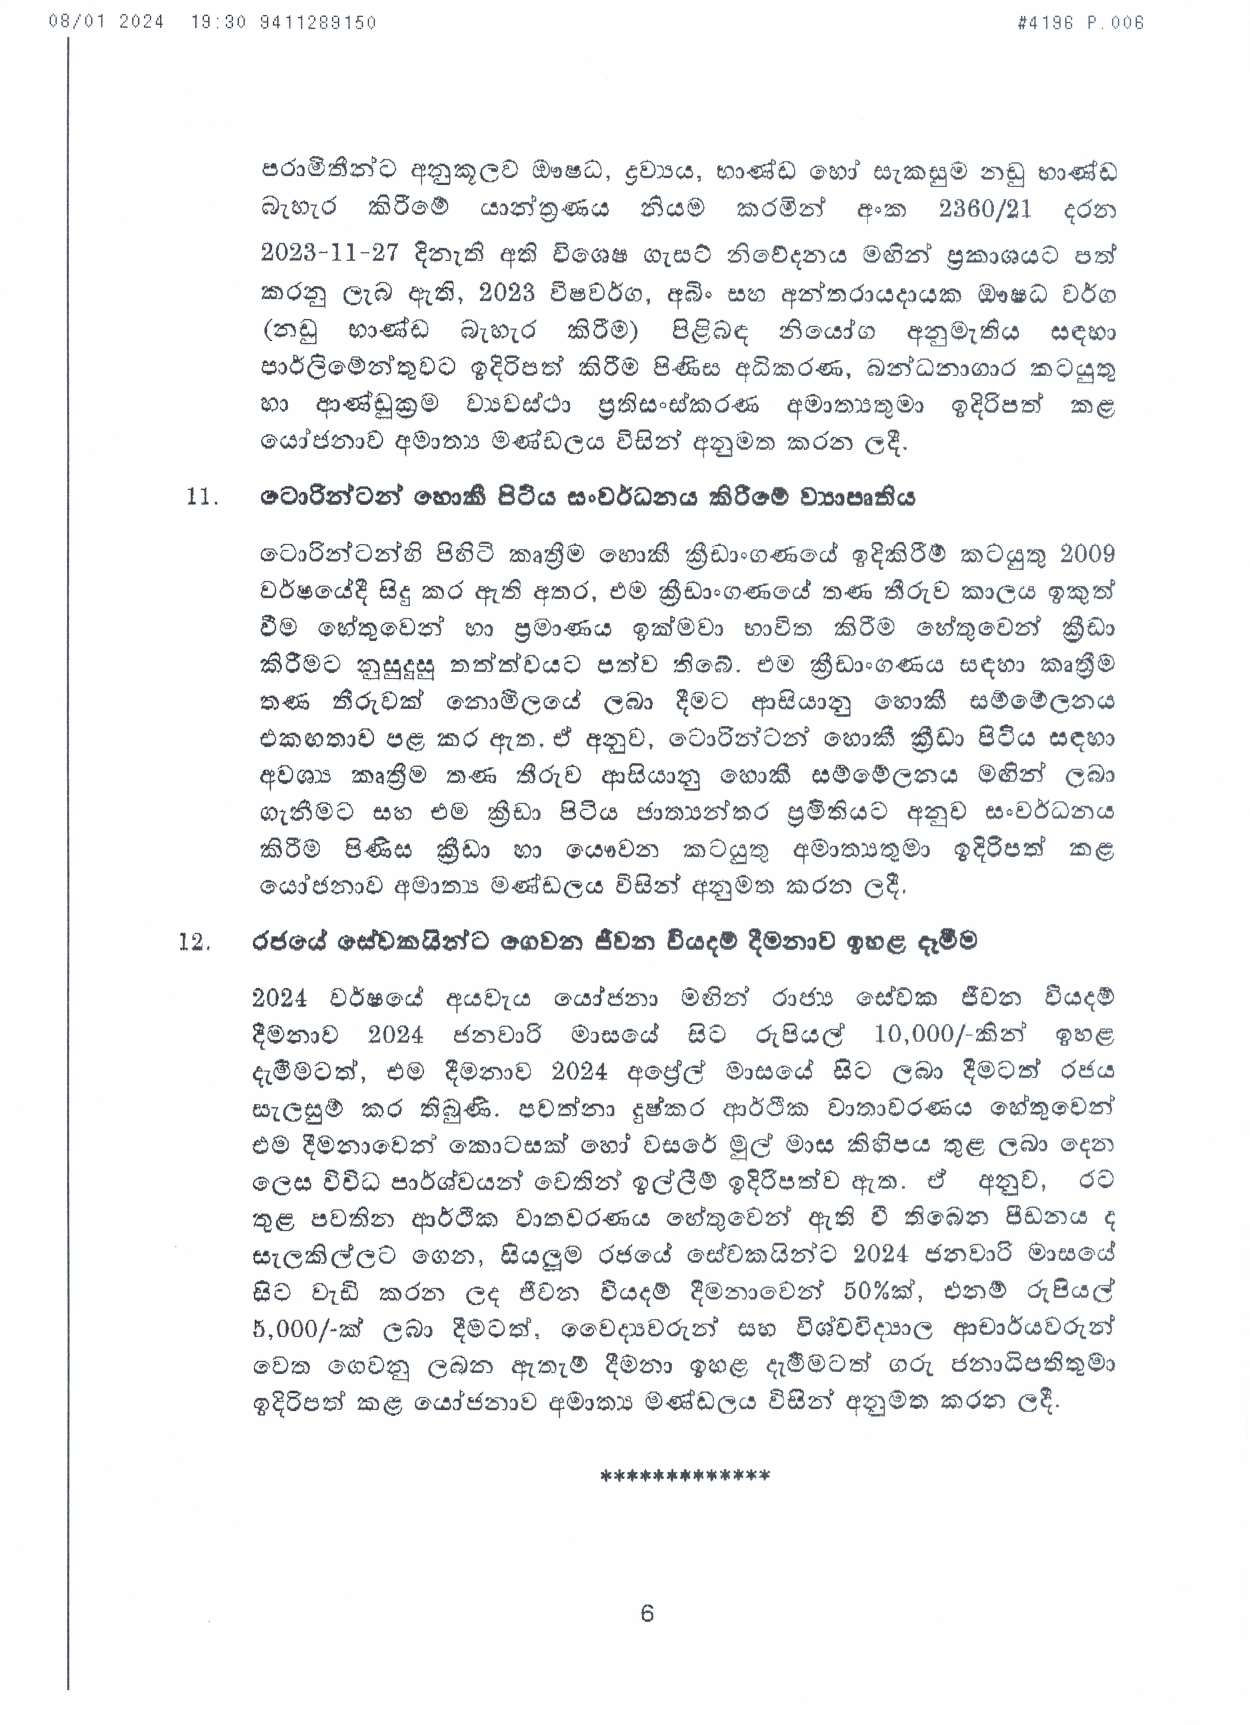 Cabinet Decision on 08.01.2024 1 page 0006